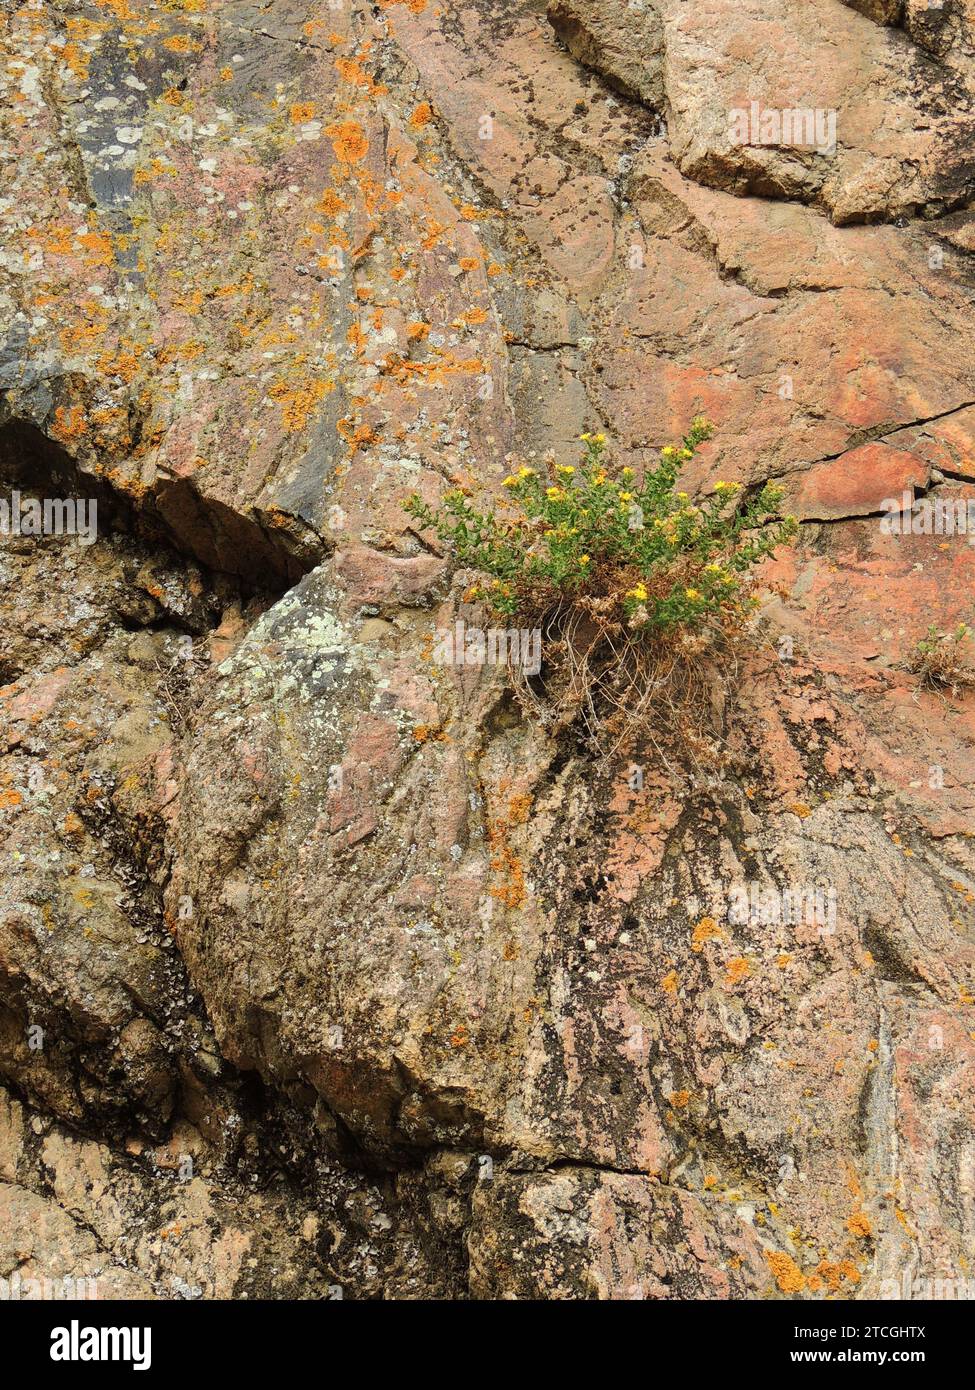 yellow aster wildflowers and colorful orange lichen on the pink granite canyon walls in waterton canyon, littleton, colorado Stock Photo